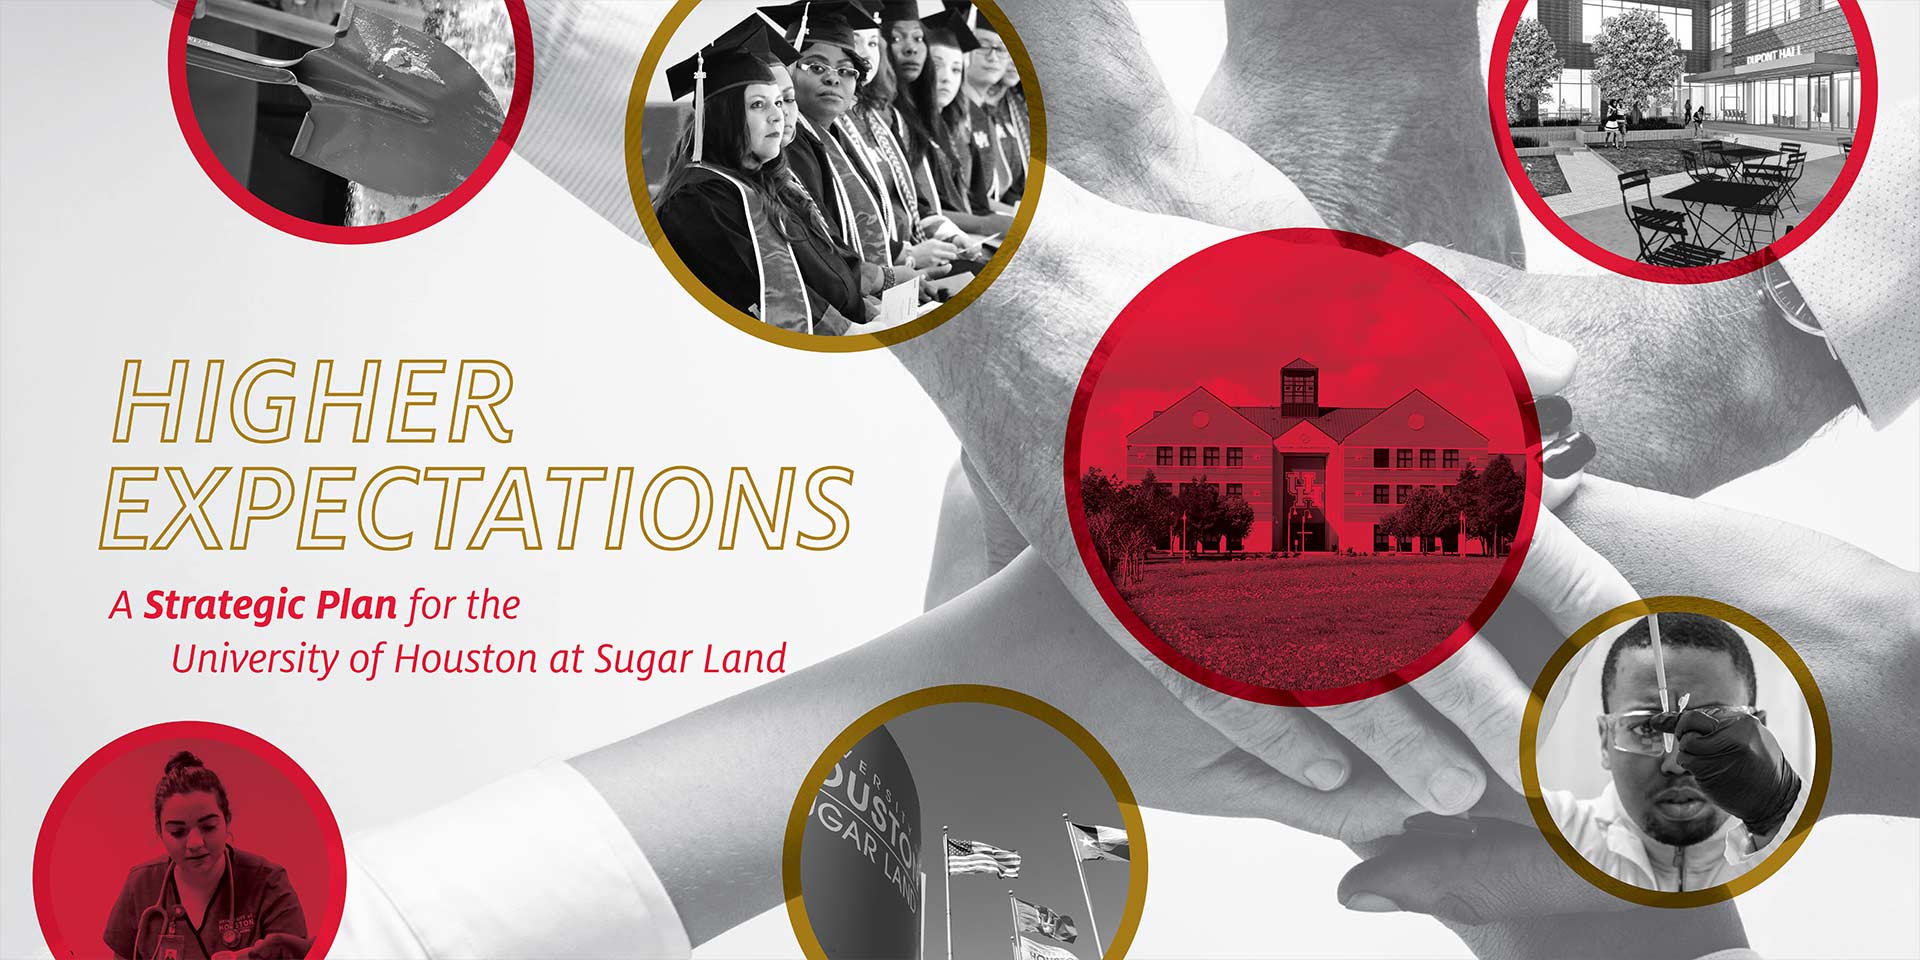 Higher Expectations: A Strategic Plan for the University of Houston at Sugar Land